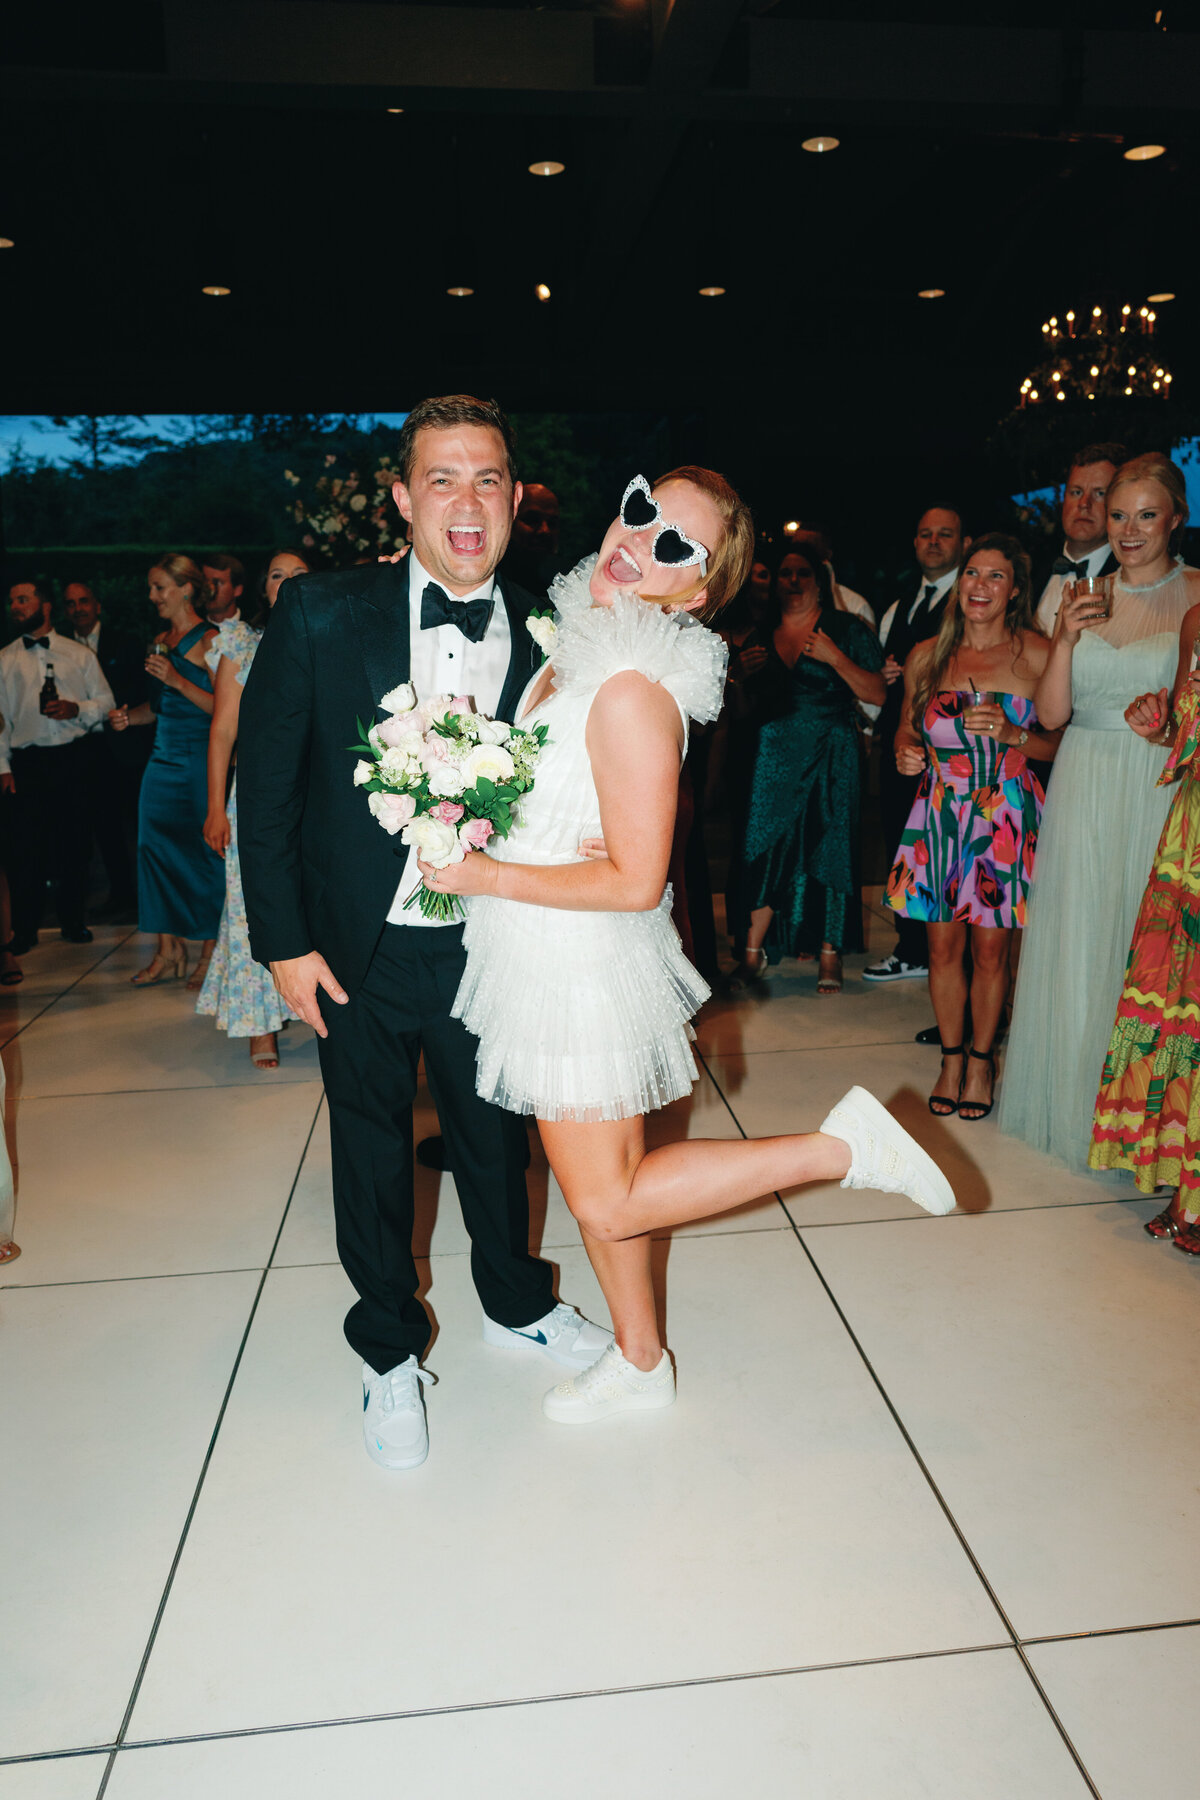 wedding_reception_old_edwards_farm_highlands_bride_groom_outfit_change_short_tulle_party_dress_white_heart_sunglasses_jimmy_choo_sneakers_wedding_kailee_dimeglio_photography-1630